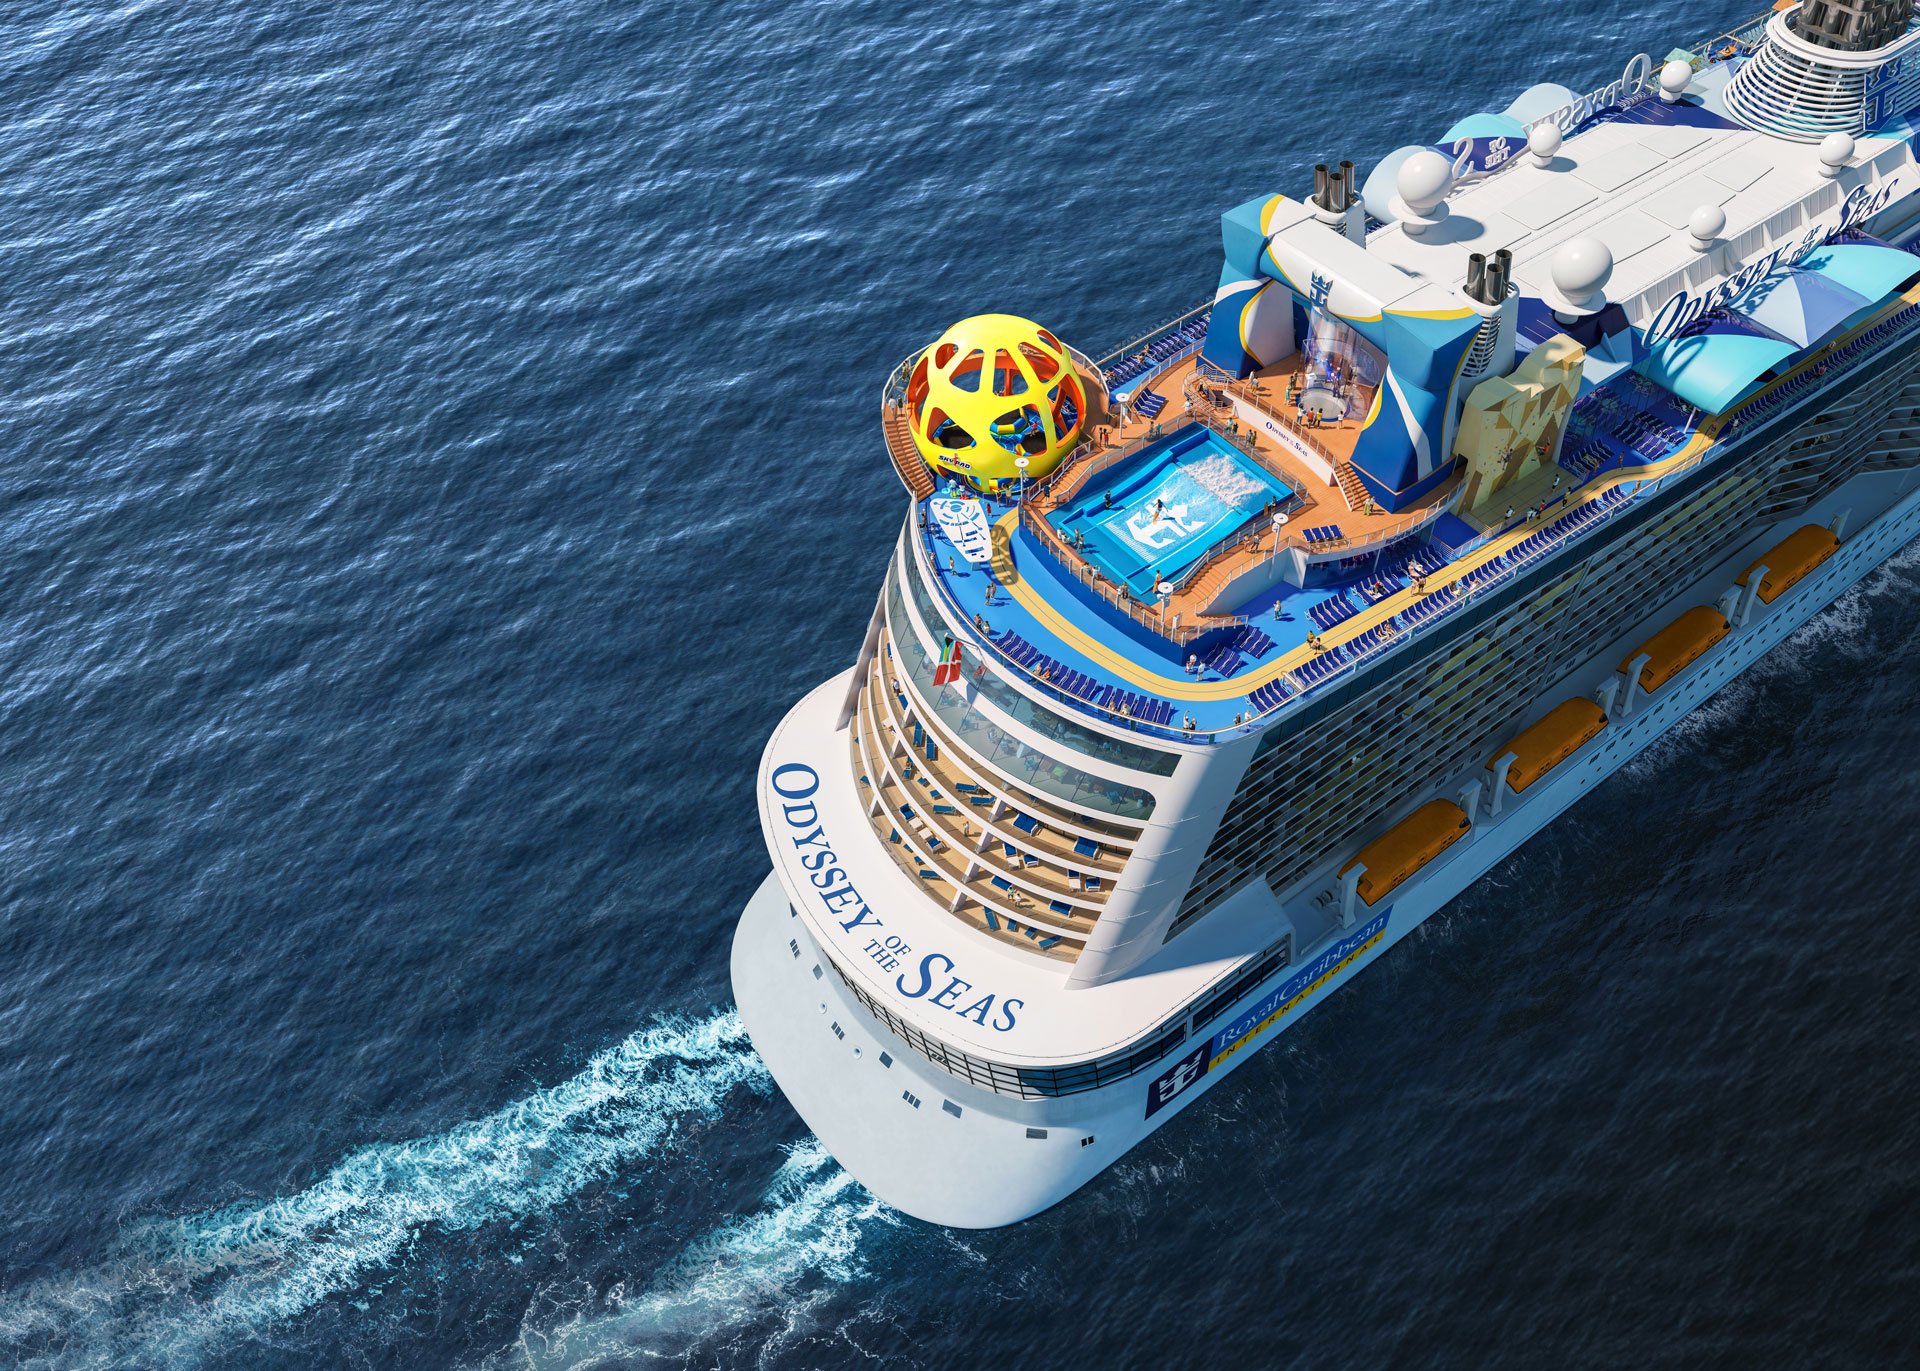 Odyssey of the Seas will start off sea trials on March 14